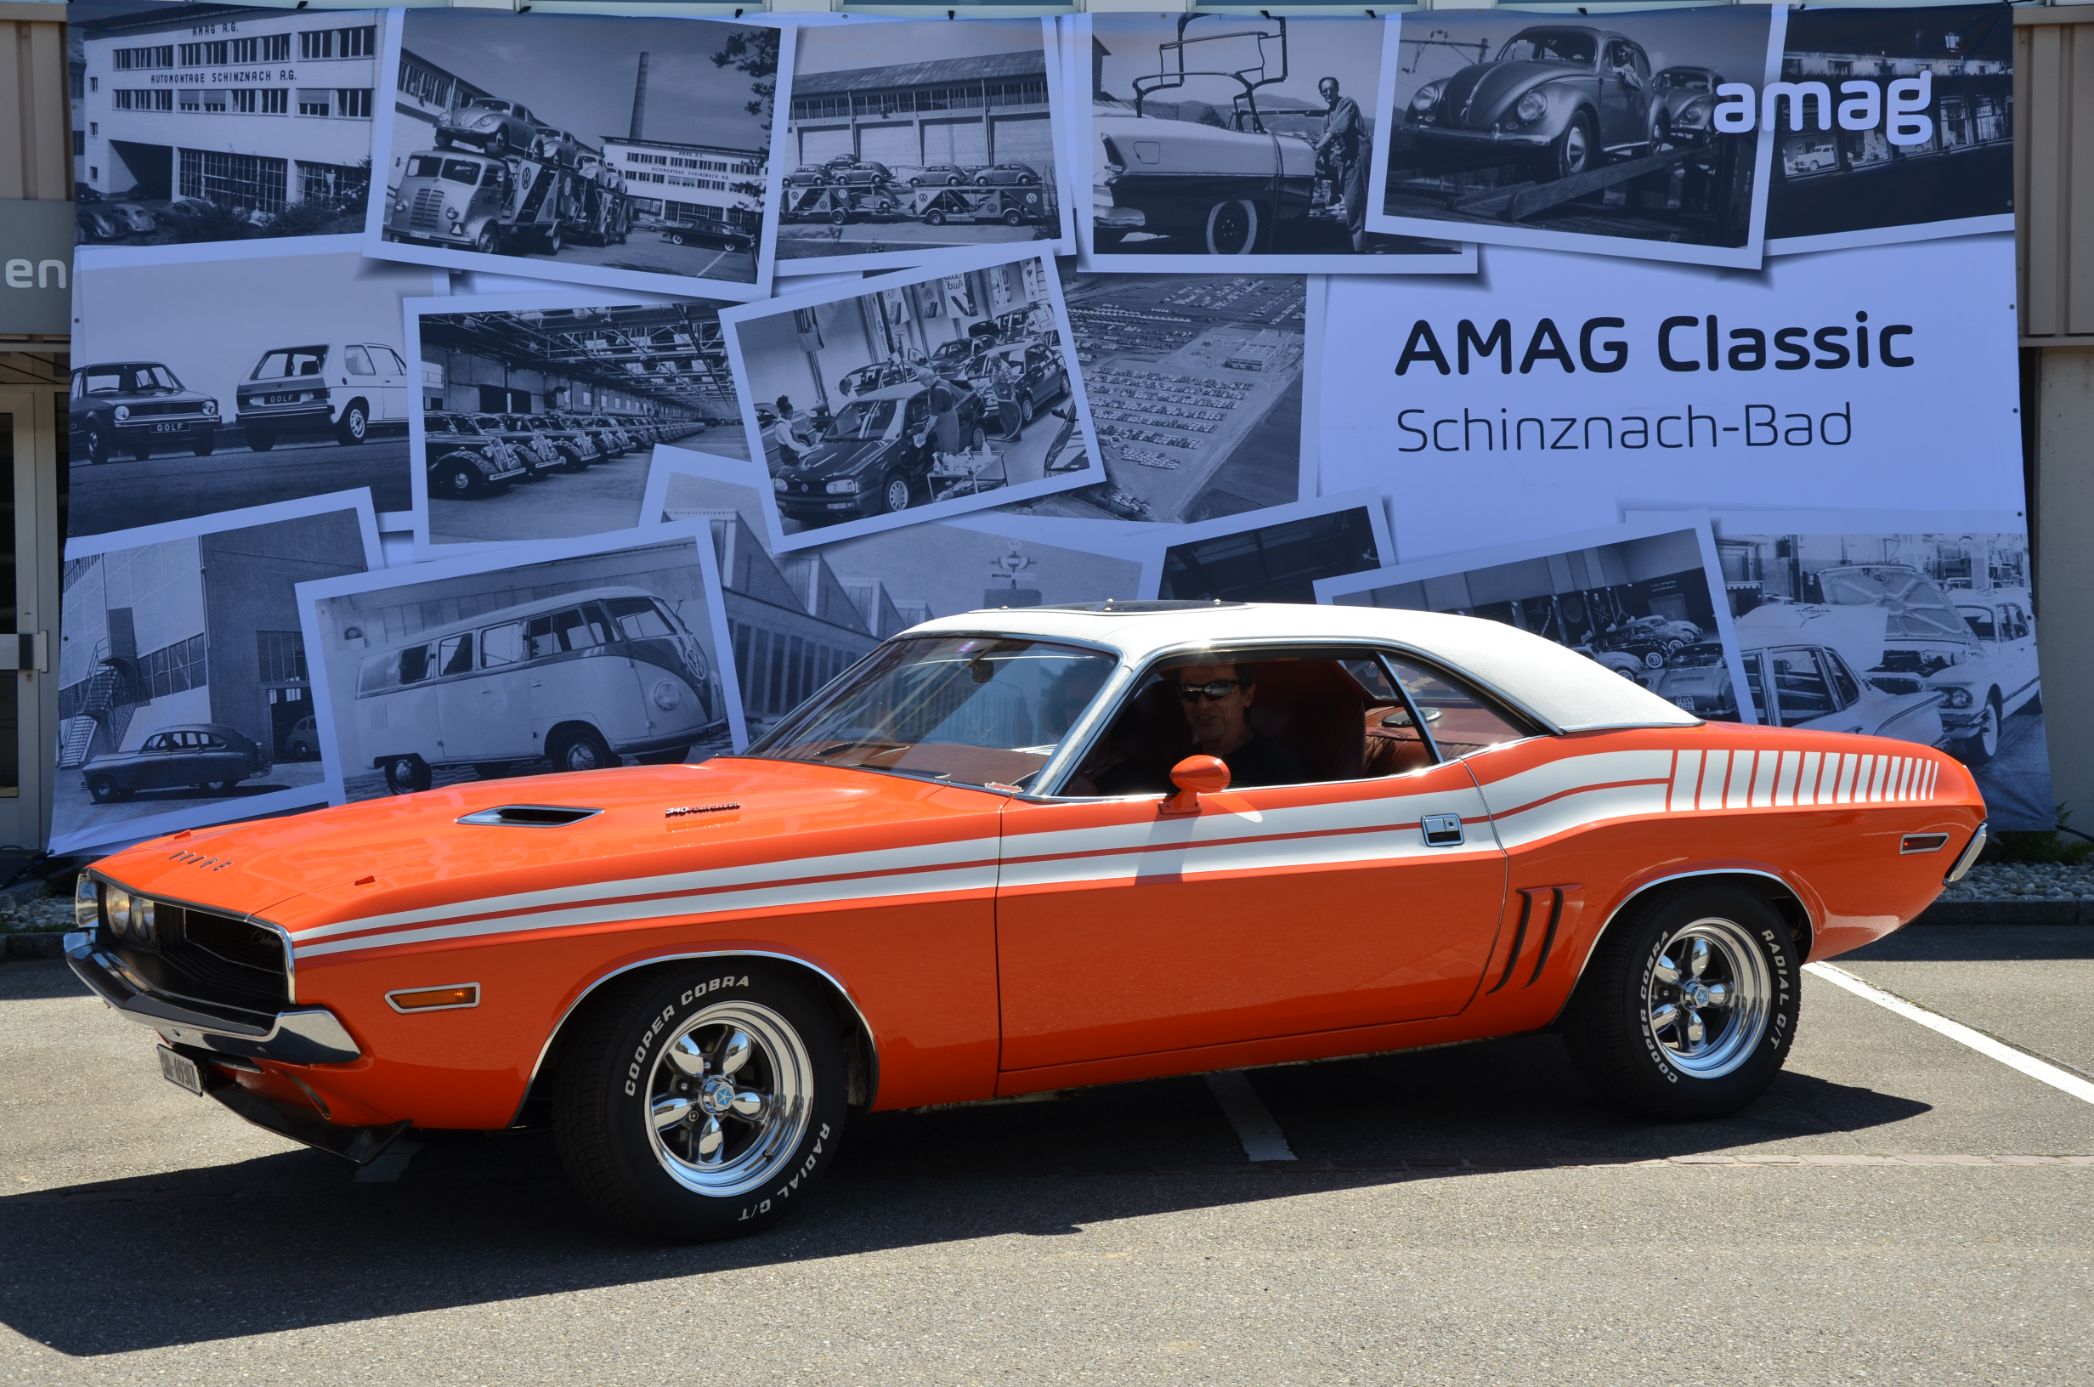 10 Things You Didn't Know About A Dodge Challenger - AEC